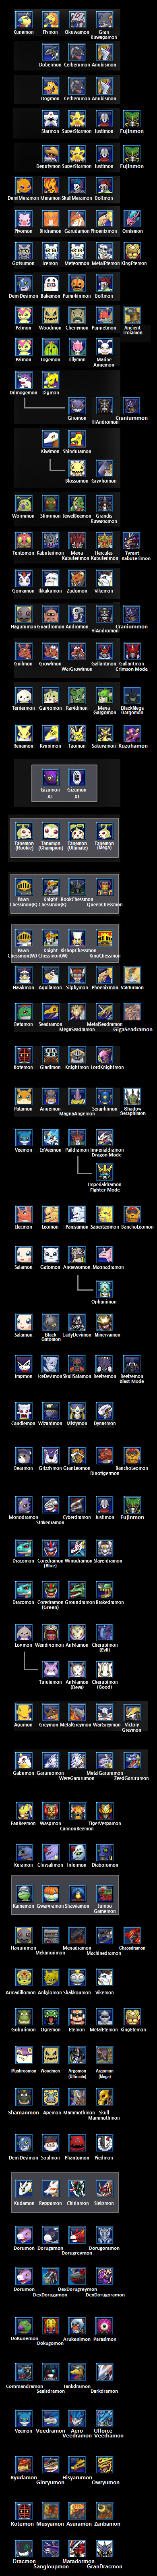 Digimon Masters Online starting up GUIDES: List of Digimon